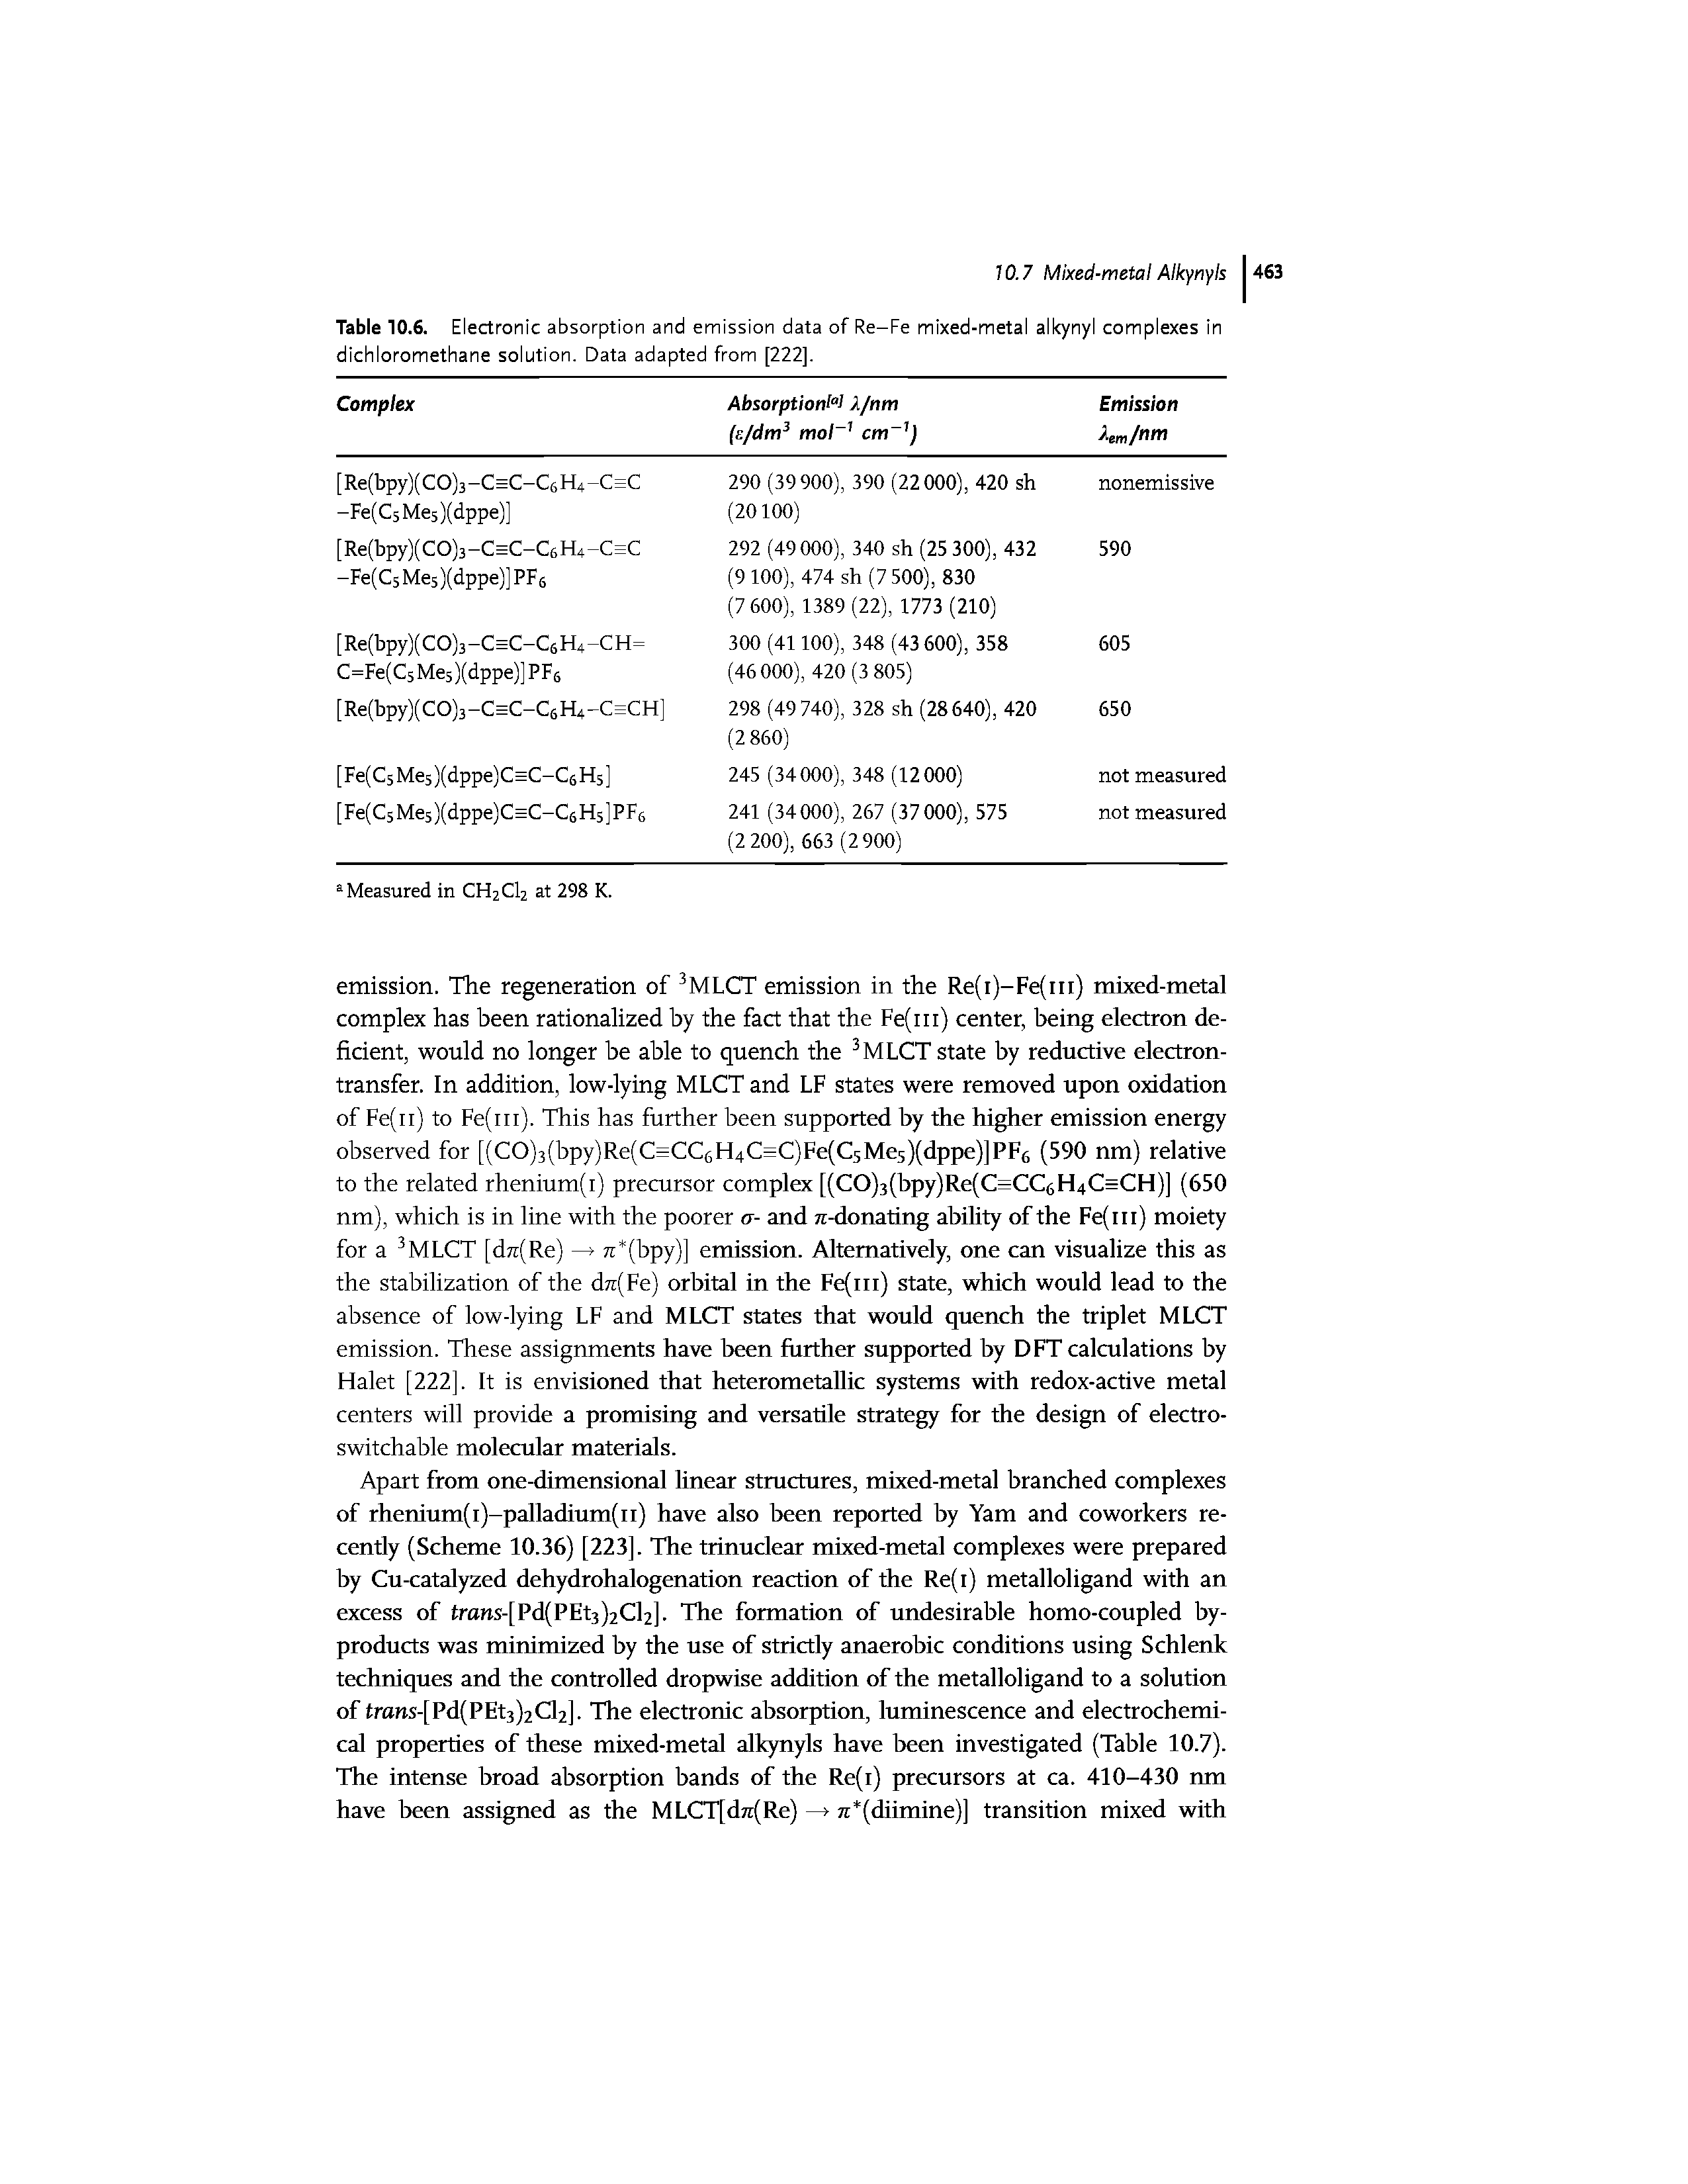 Table 10.6. Electronic absorption and emission data of Re-Fe mixed-metal alkynyl complexes in dichloromethane solution. Data adapted from [222].